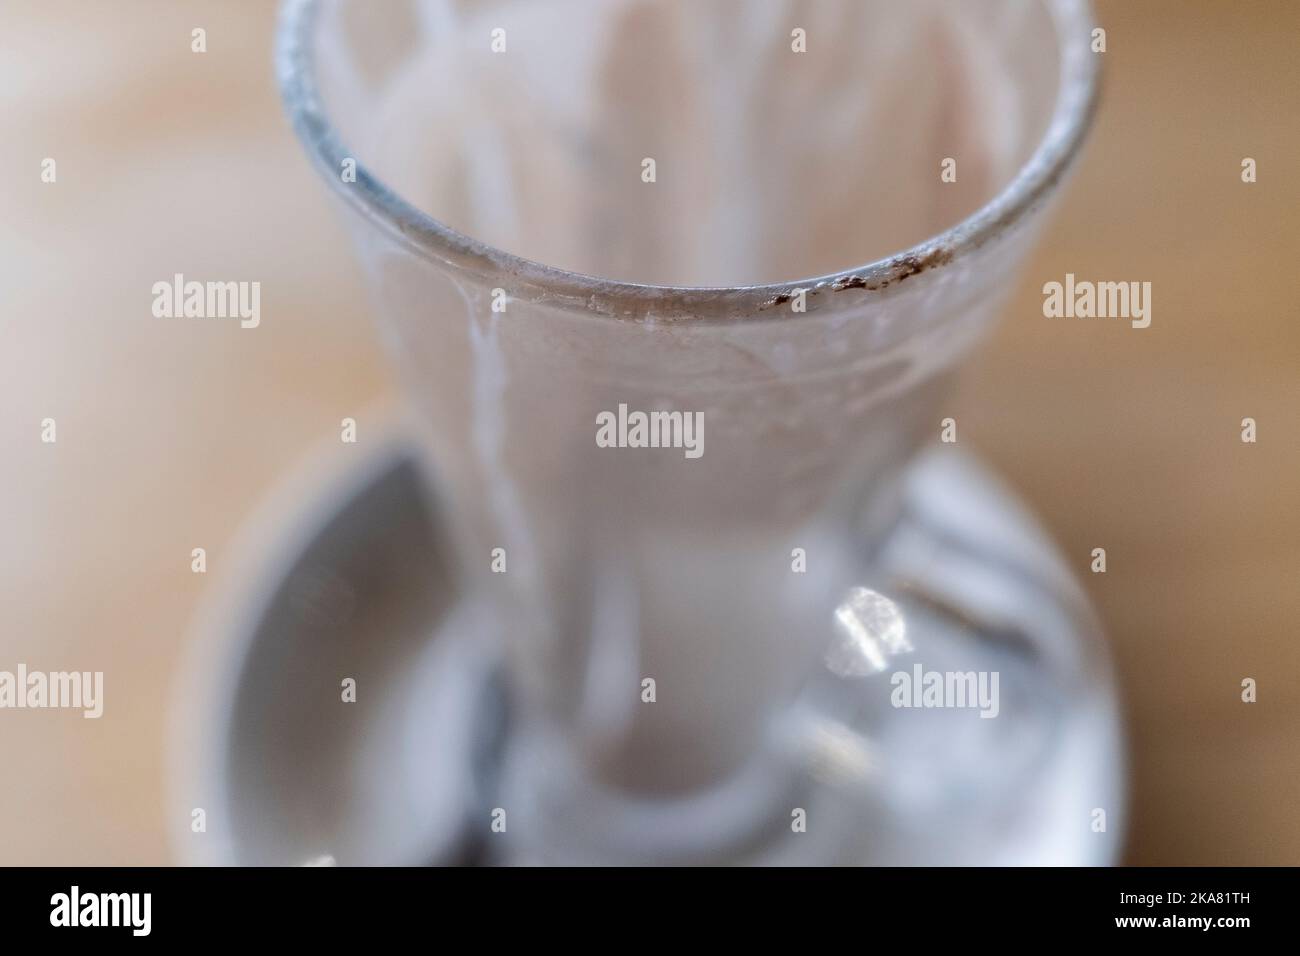 A closeup view of the rim of a used latte glass in a saucer on a table. Stock Photo